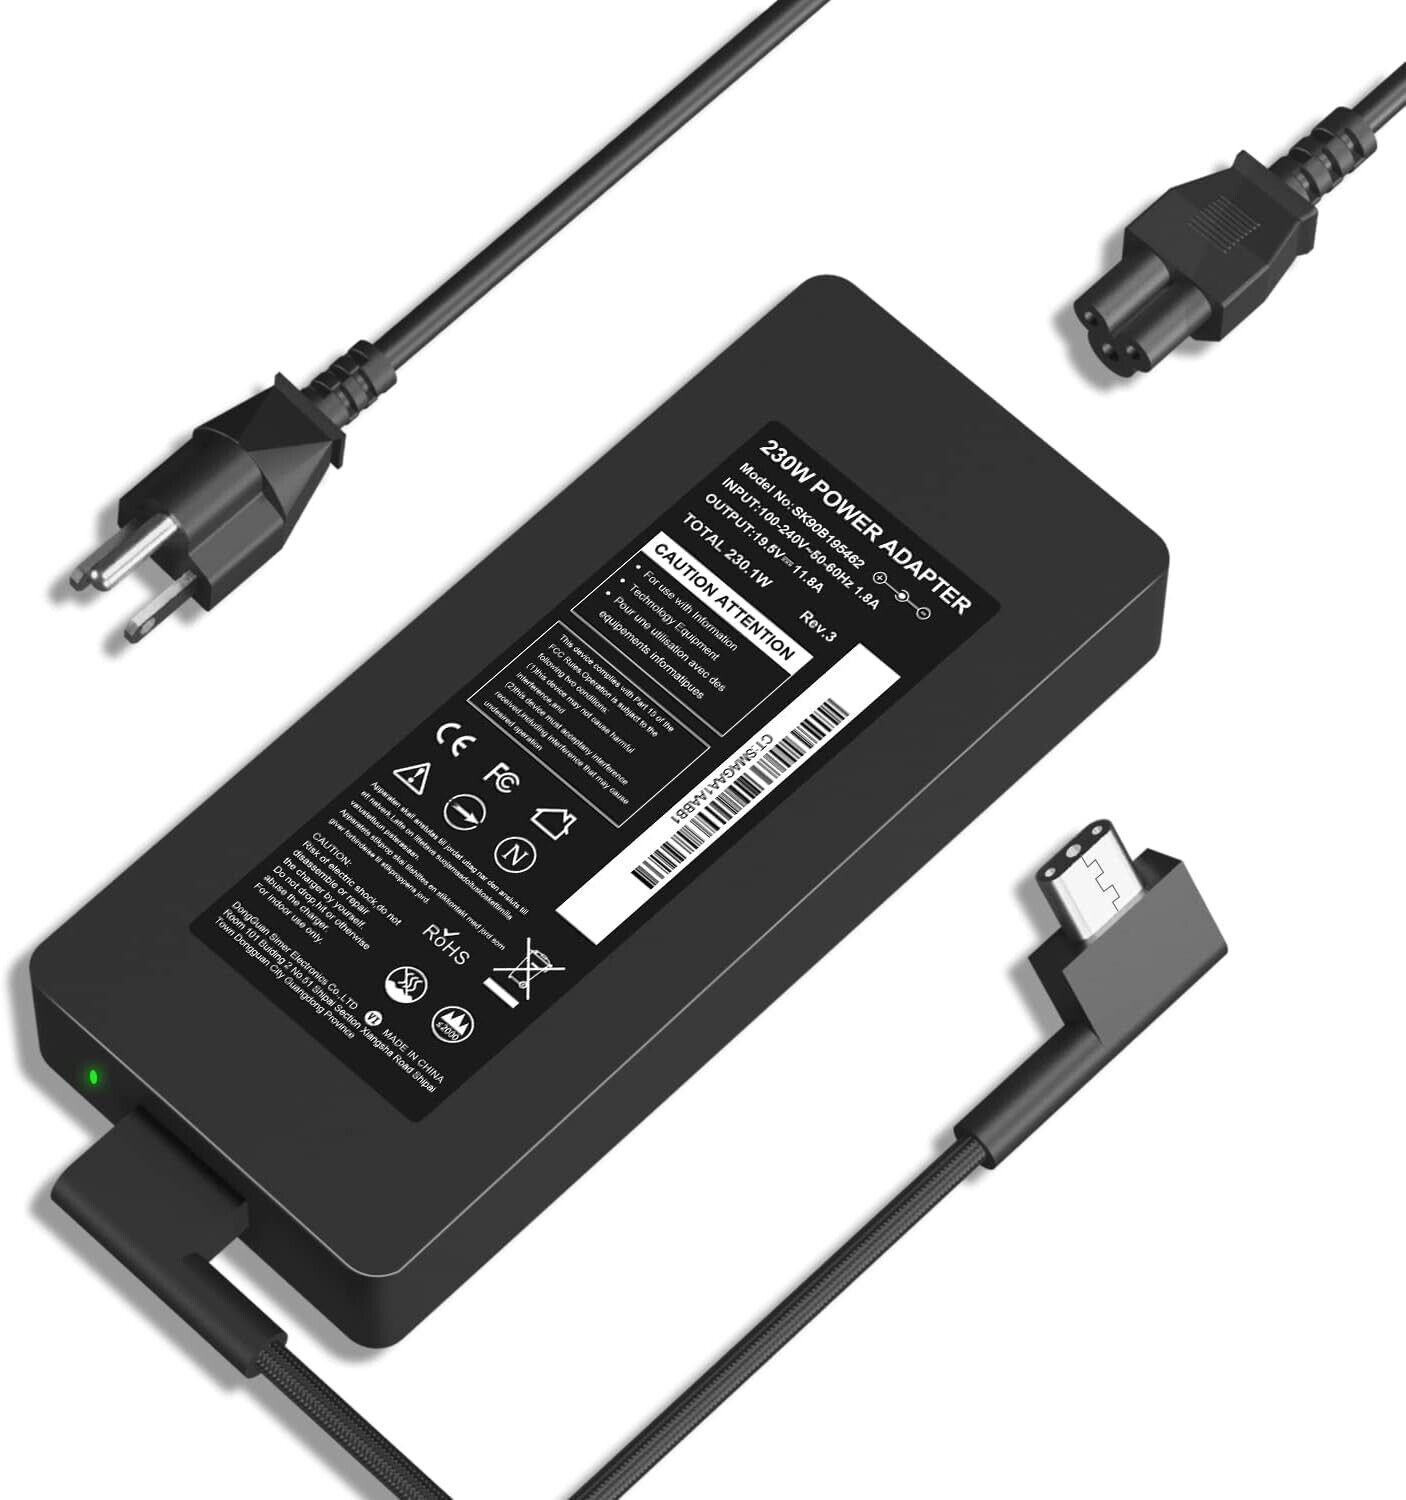 200W AC Adapter Charger For Razer Blade 15 RZ09-03286E22-R3U1 i7 Gaming Laptop